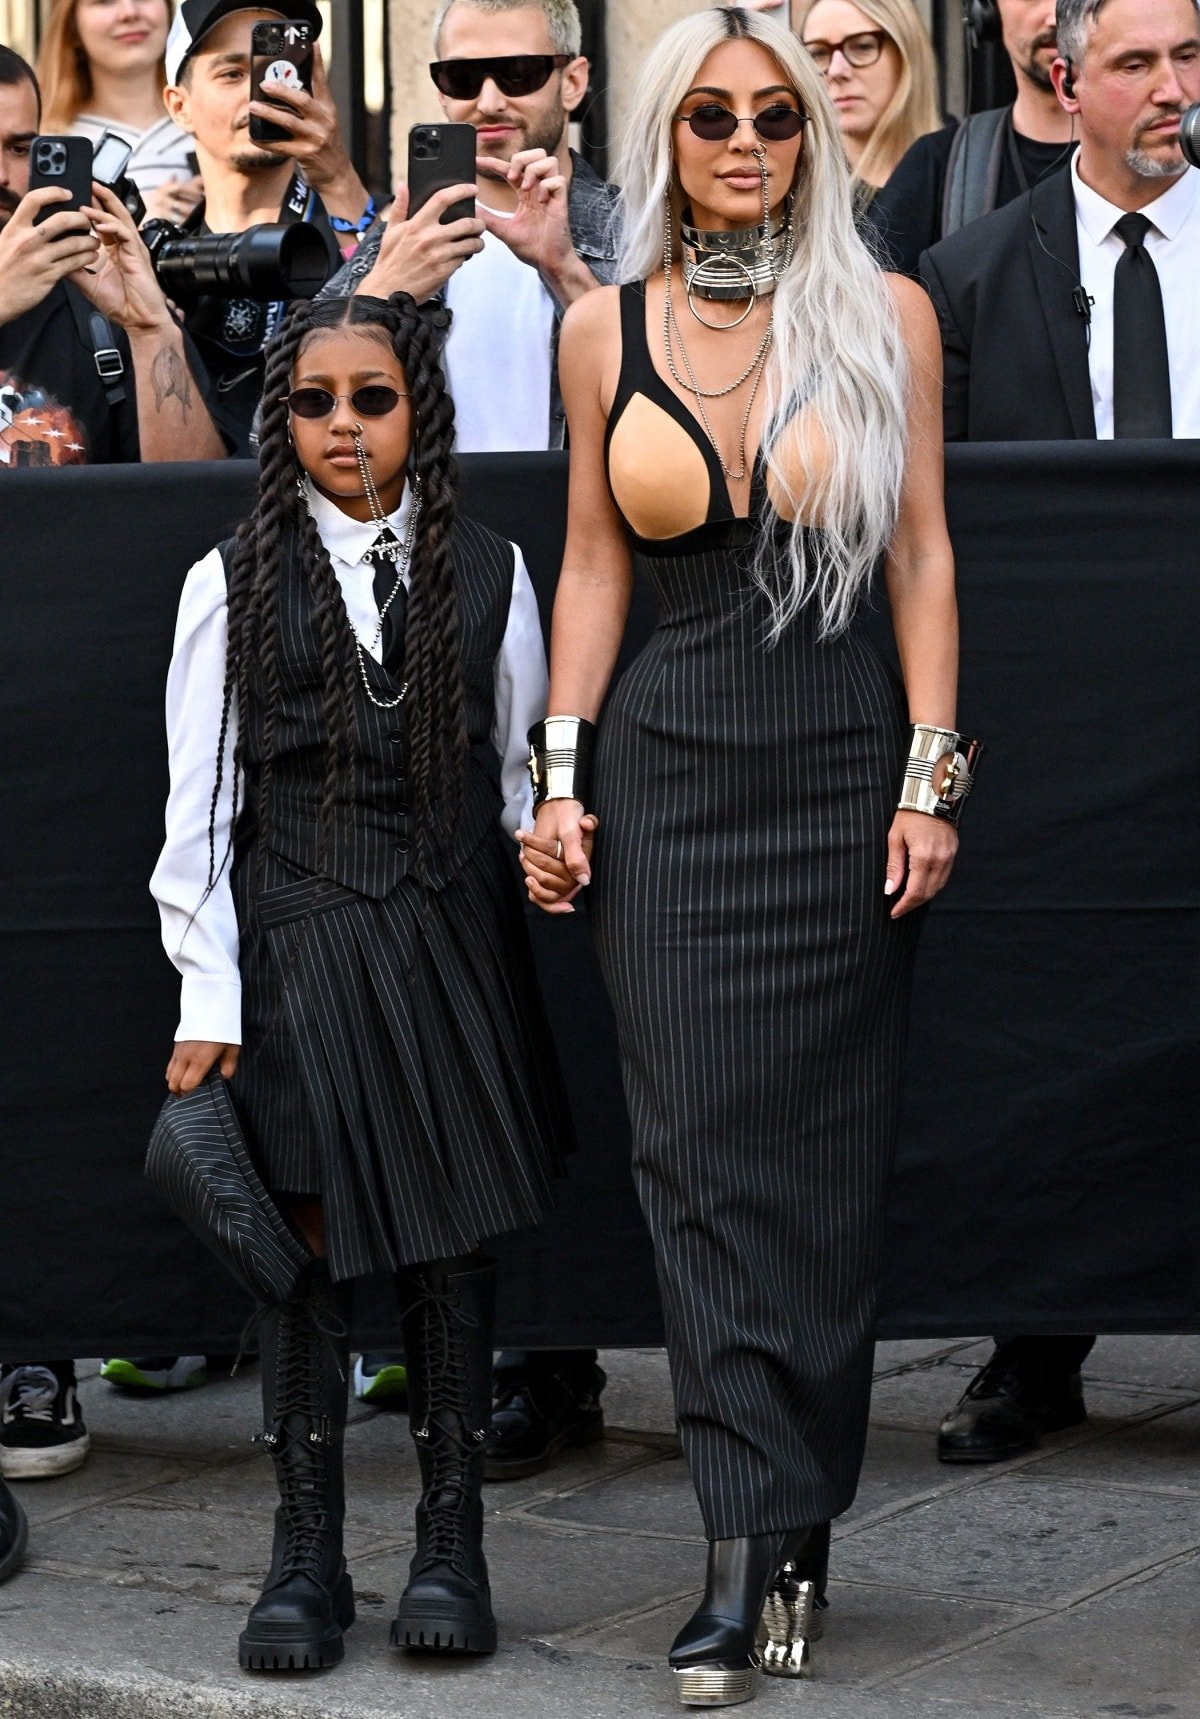 North West and Kim Kardashian in matching pinstriped looks with combat boots and platform heels